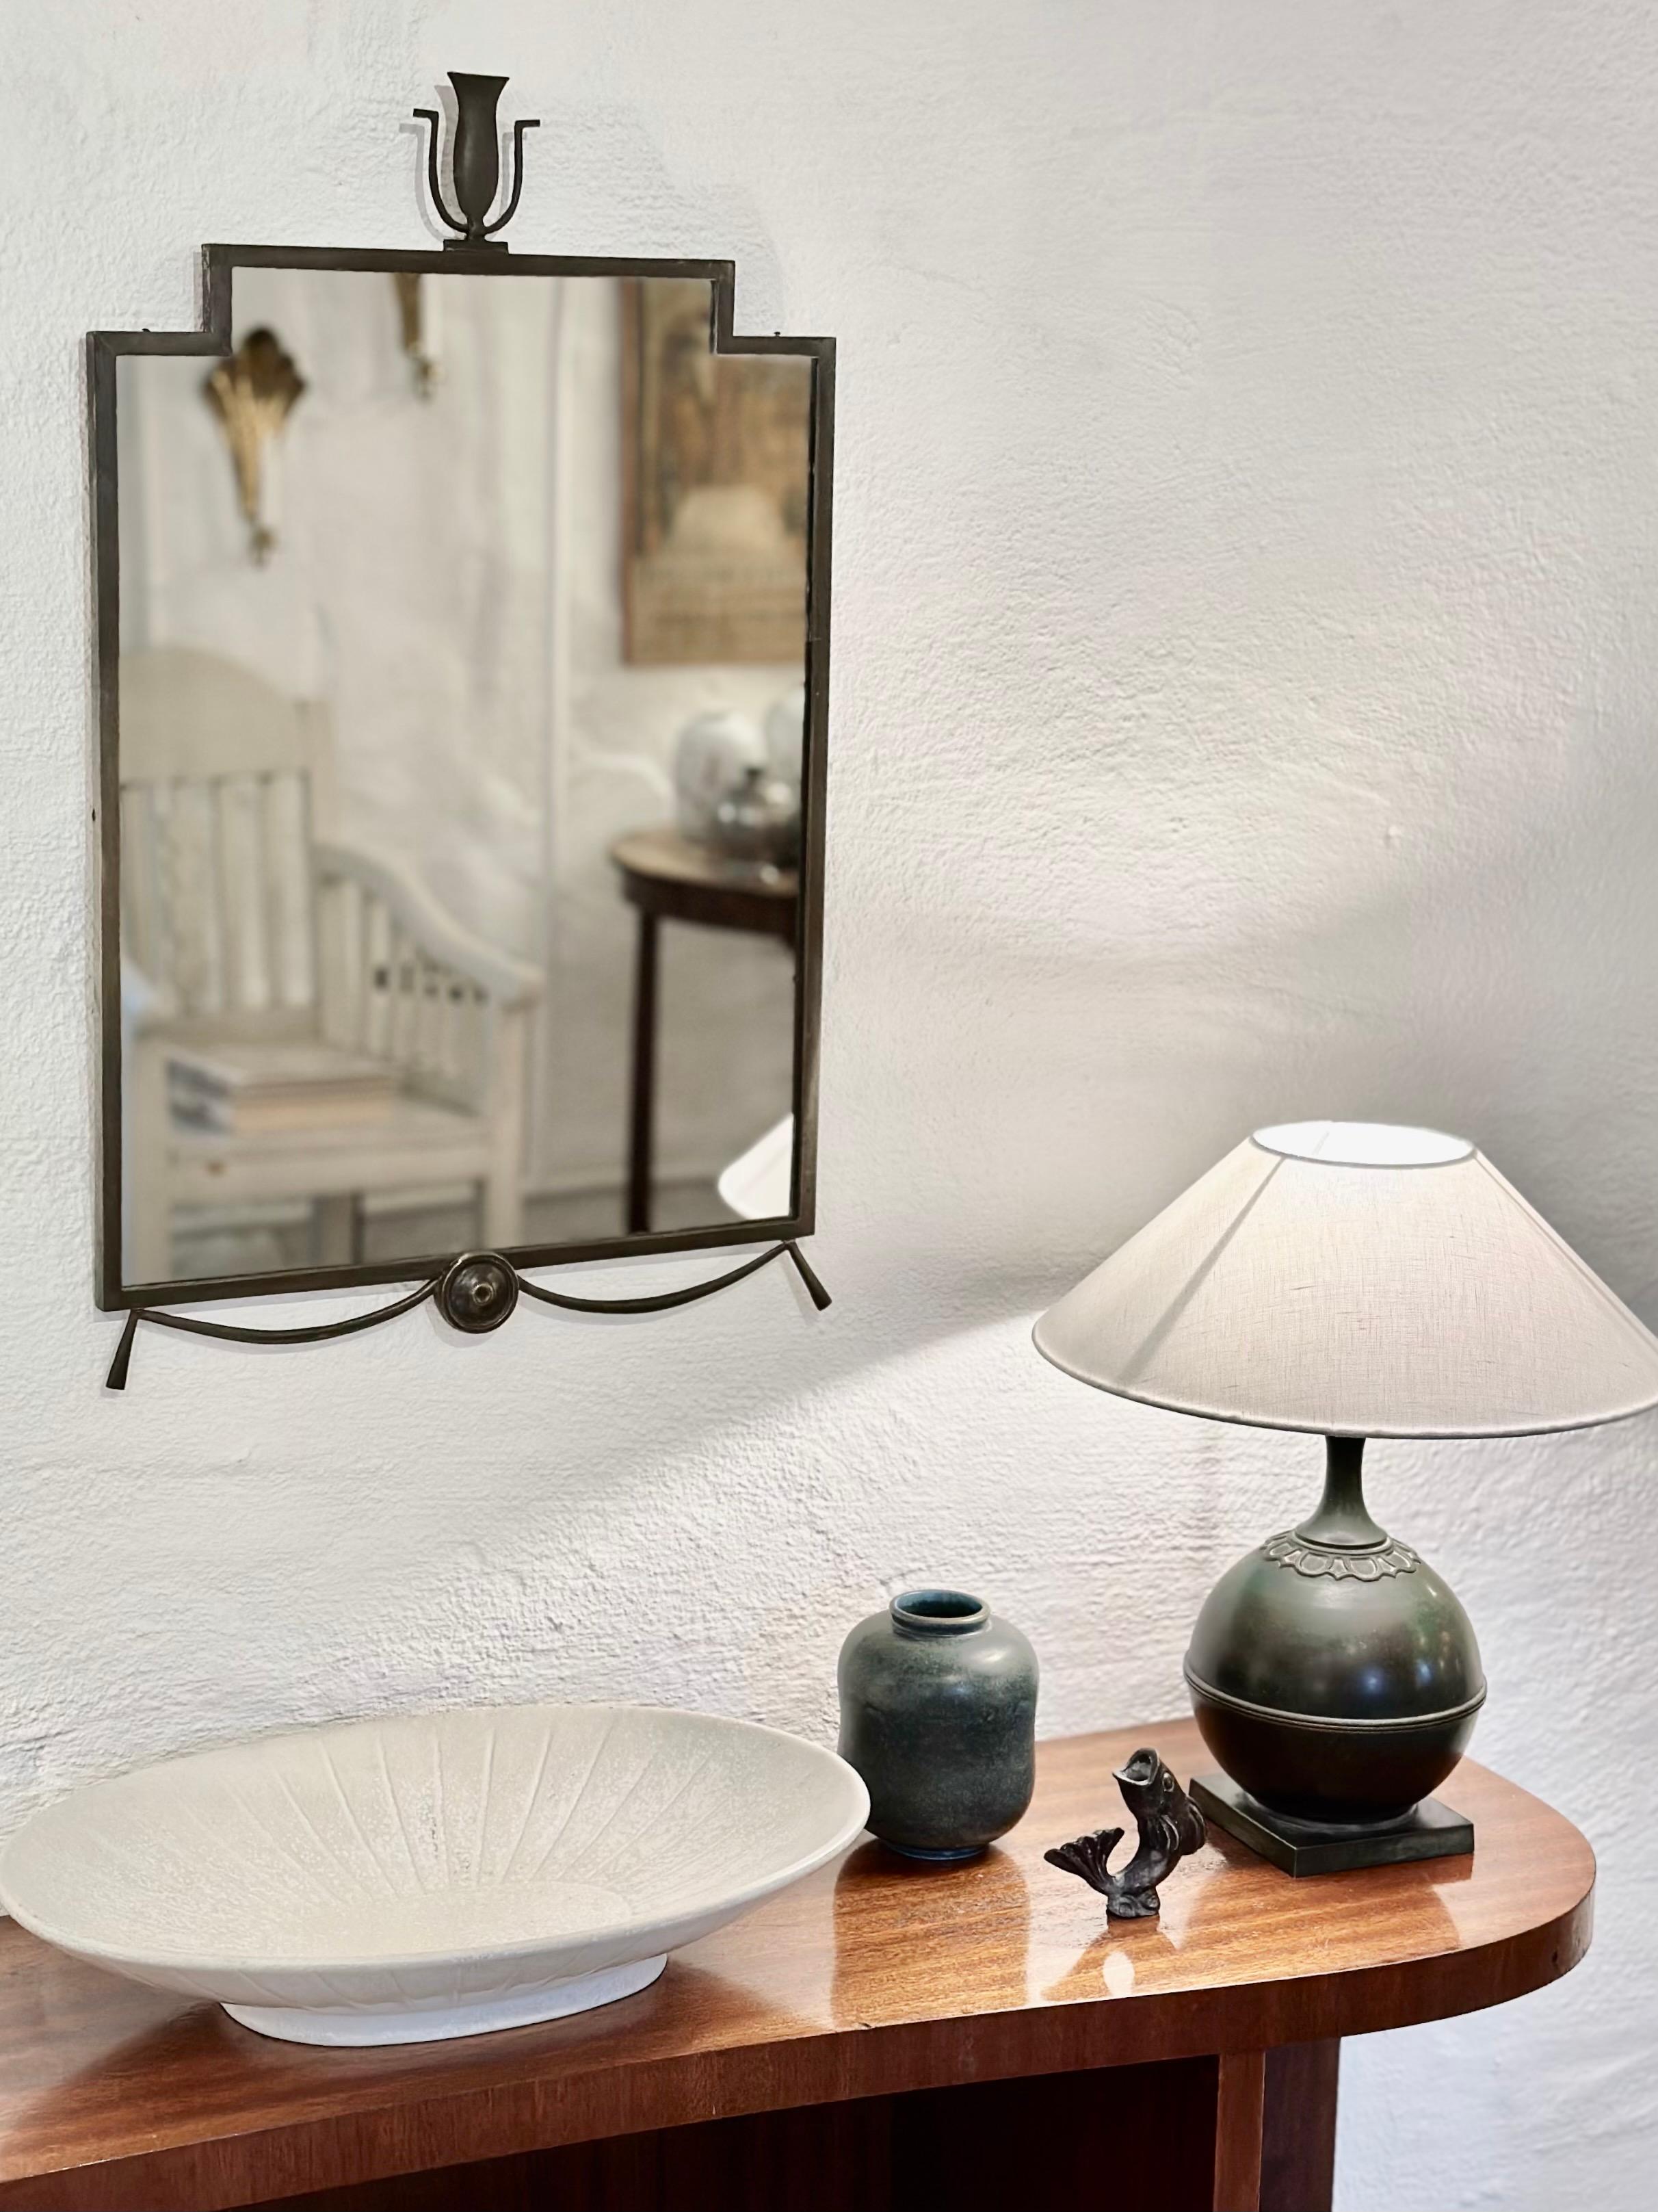 Rare and decorative Swedish Grace patinated bronze mirror signed Gustav Melin, Sthlm, 1927. Beautiful clean and elegant design that makes a subtle statement in modern interiors. The piece is in good condition but has a repair welding where the ends